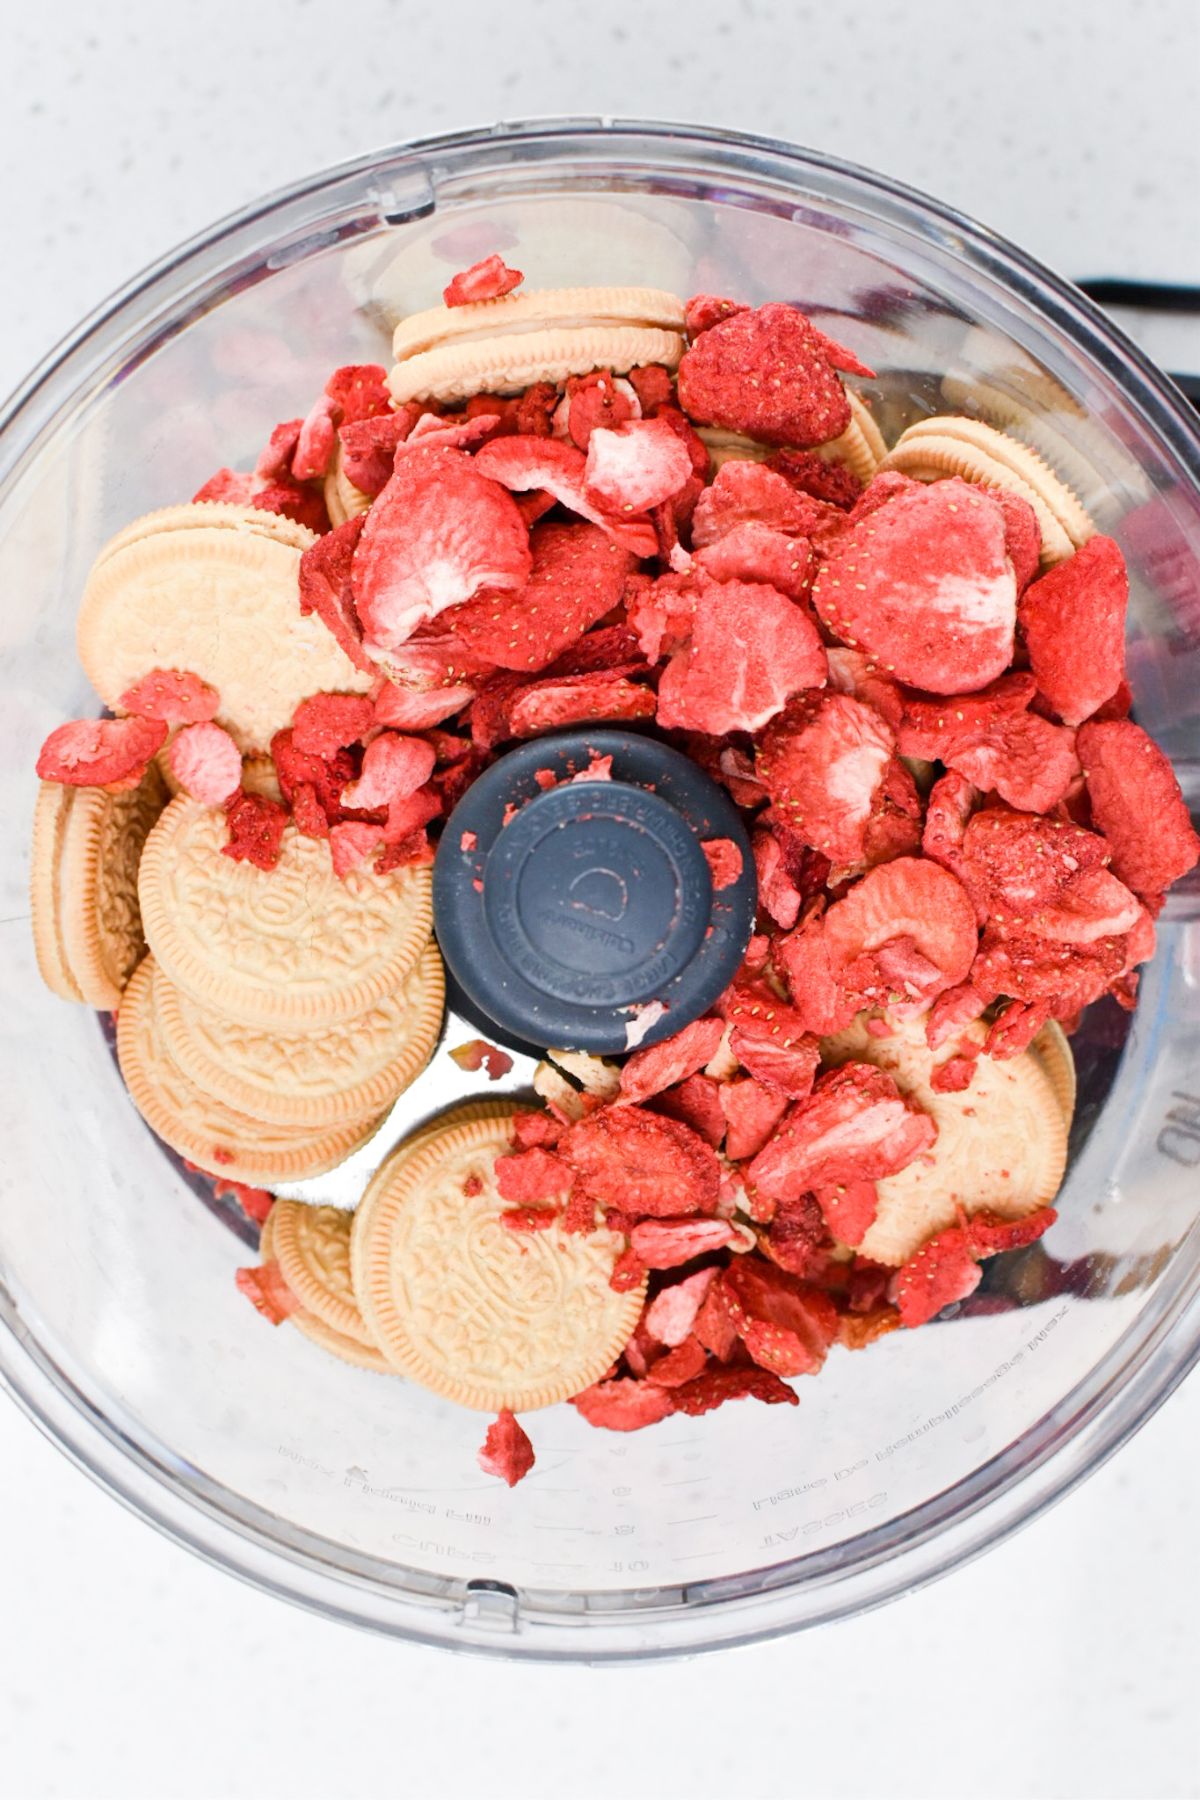 Golden Oreos, and freeze-dried strawberries in a food processor.